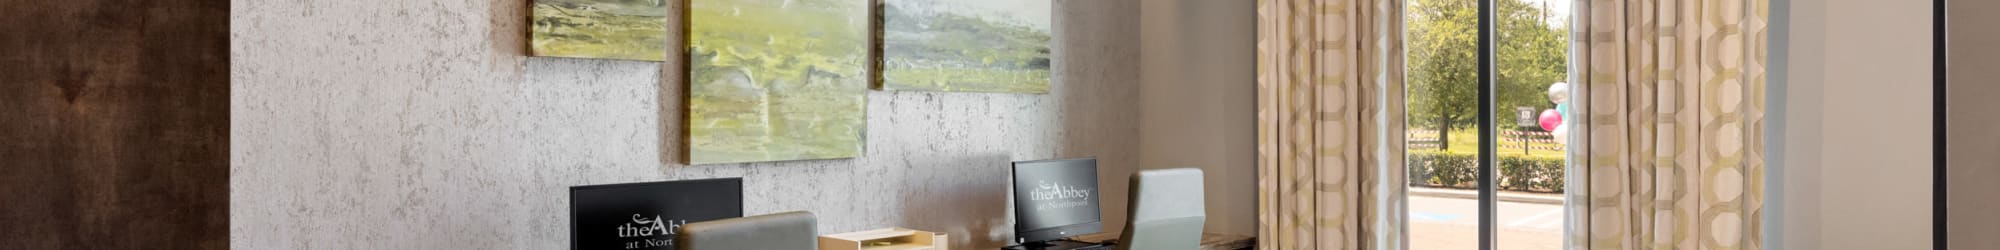 Schedule a tour of The Abbey at Northpoint in Spring, Texas